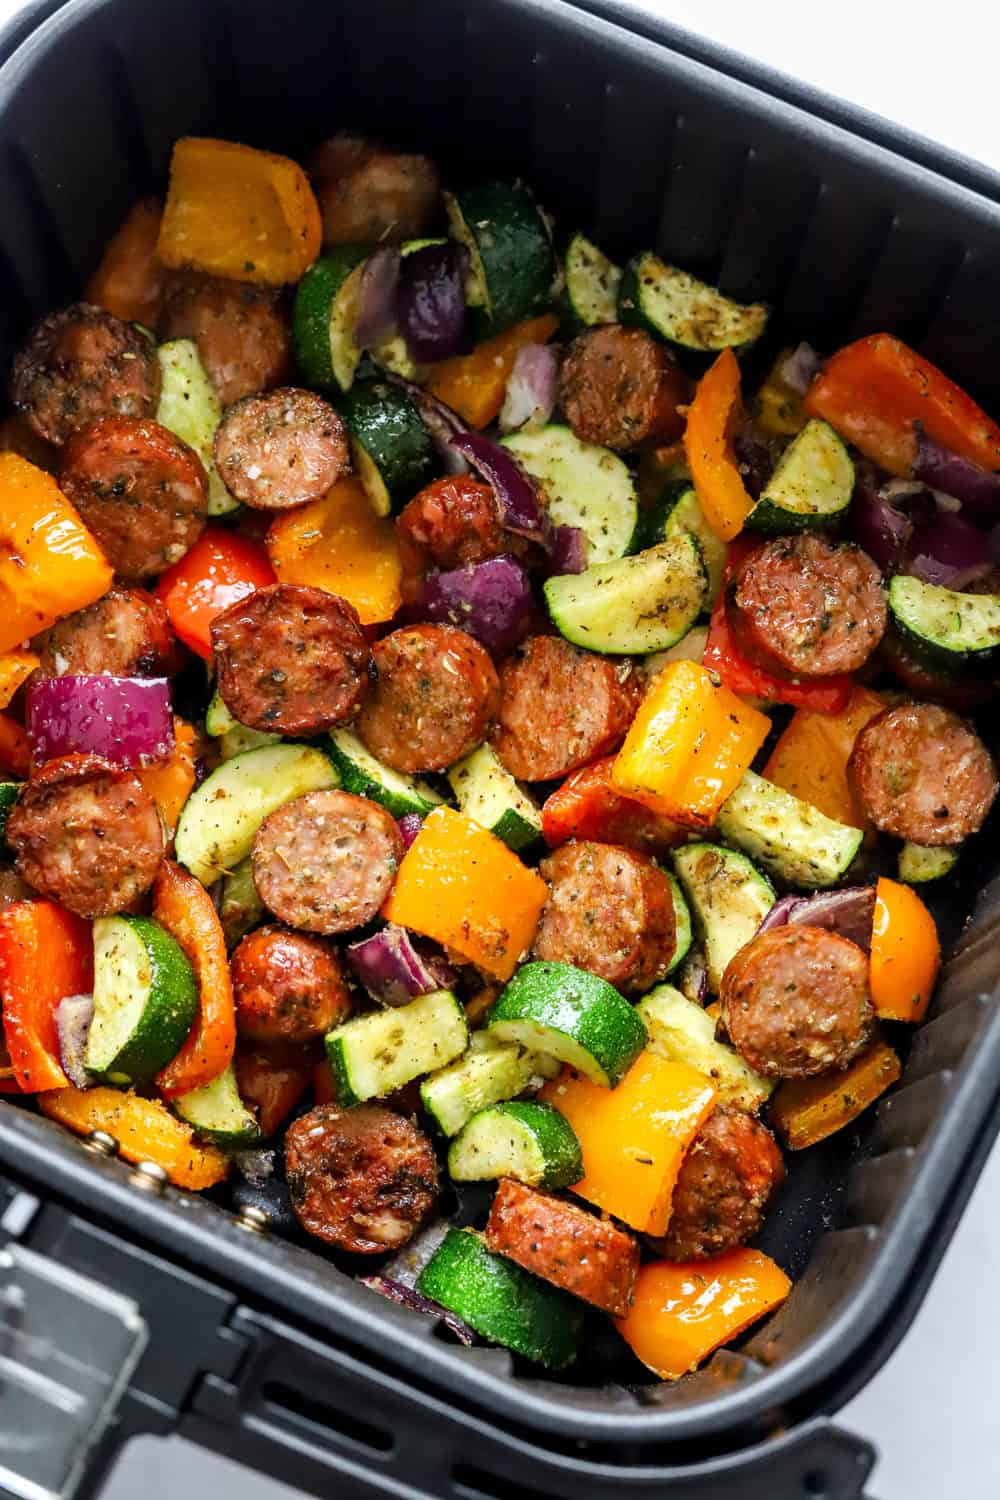 Sausage and veggies in a square, black air fryer basket. 